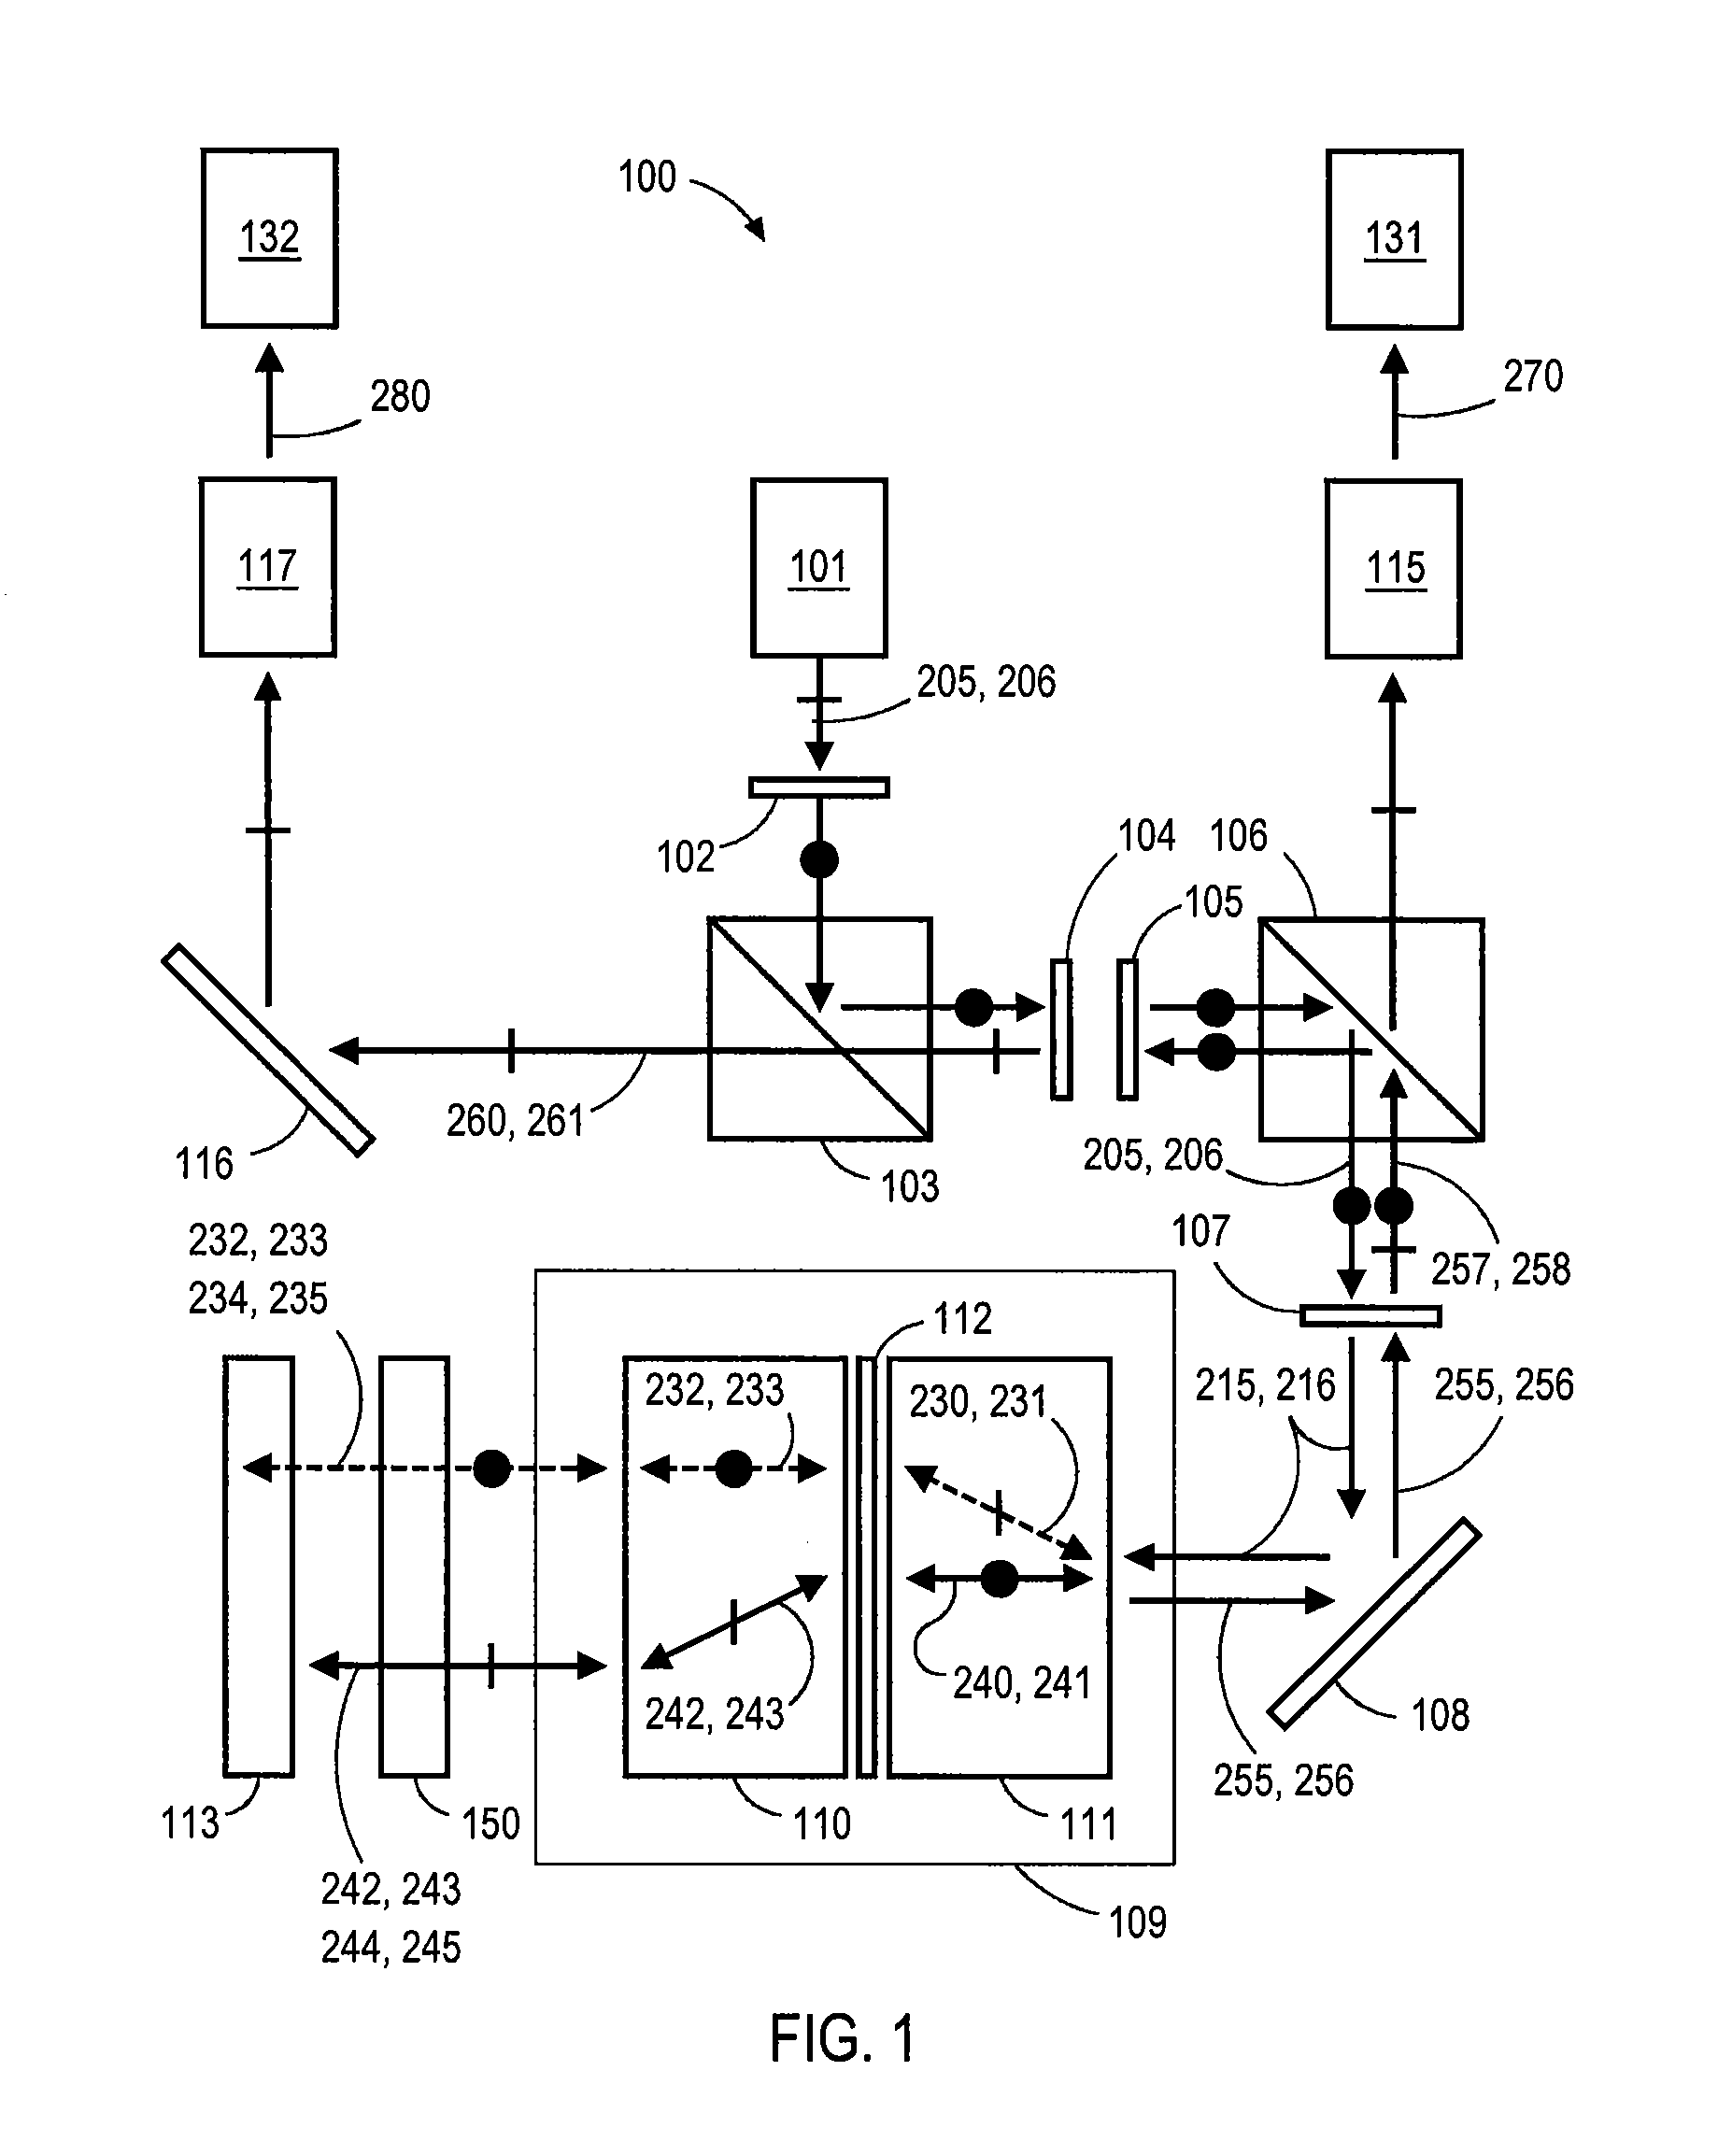 Delay line interferometer with liquid crystal tuning element